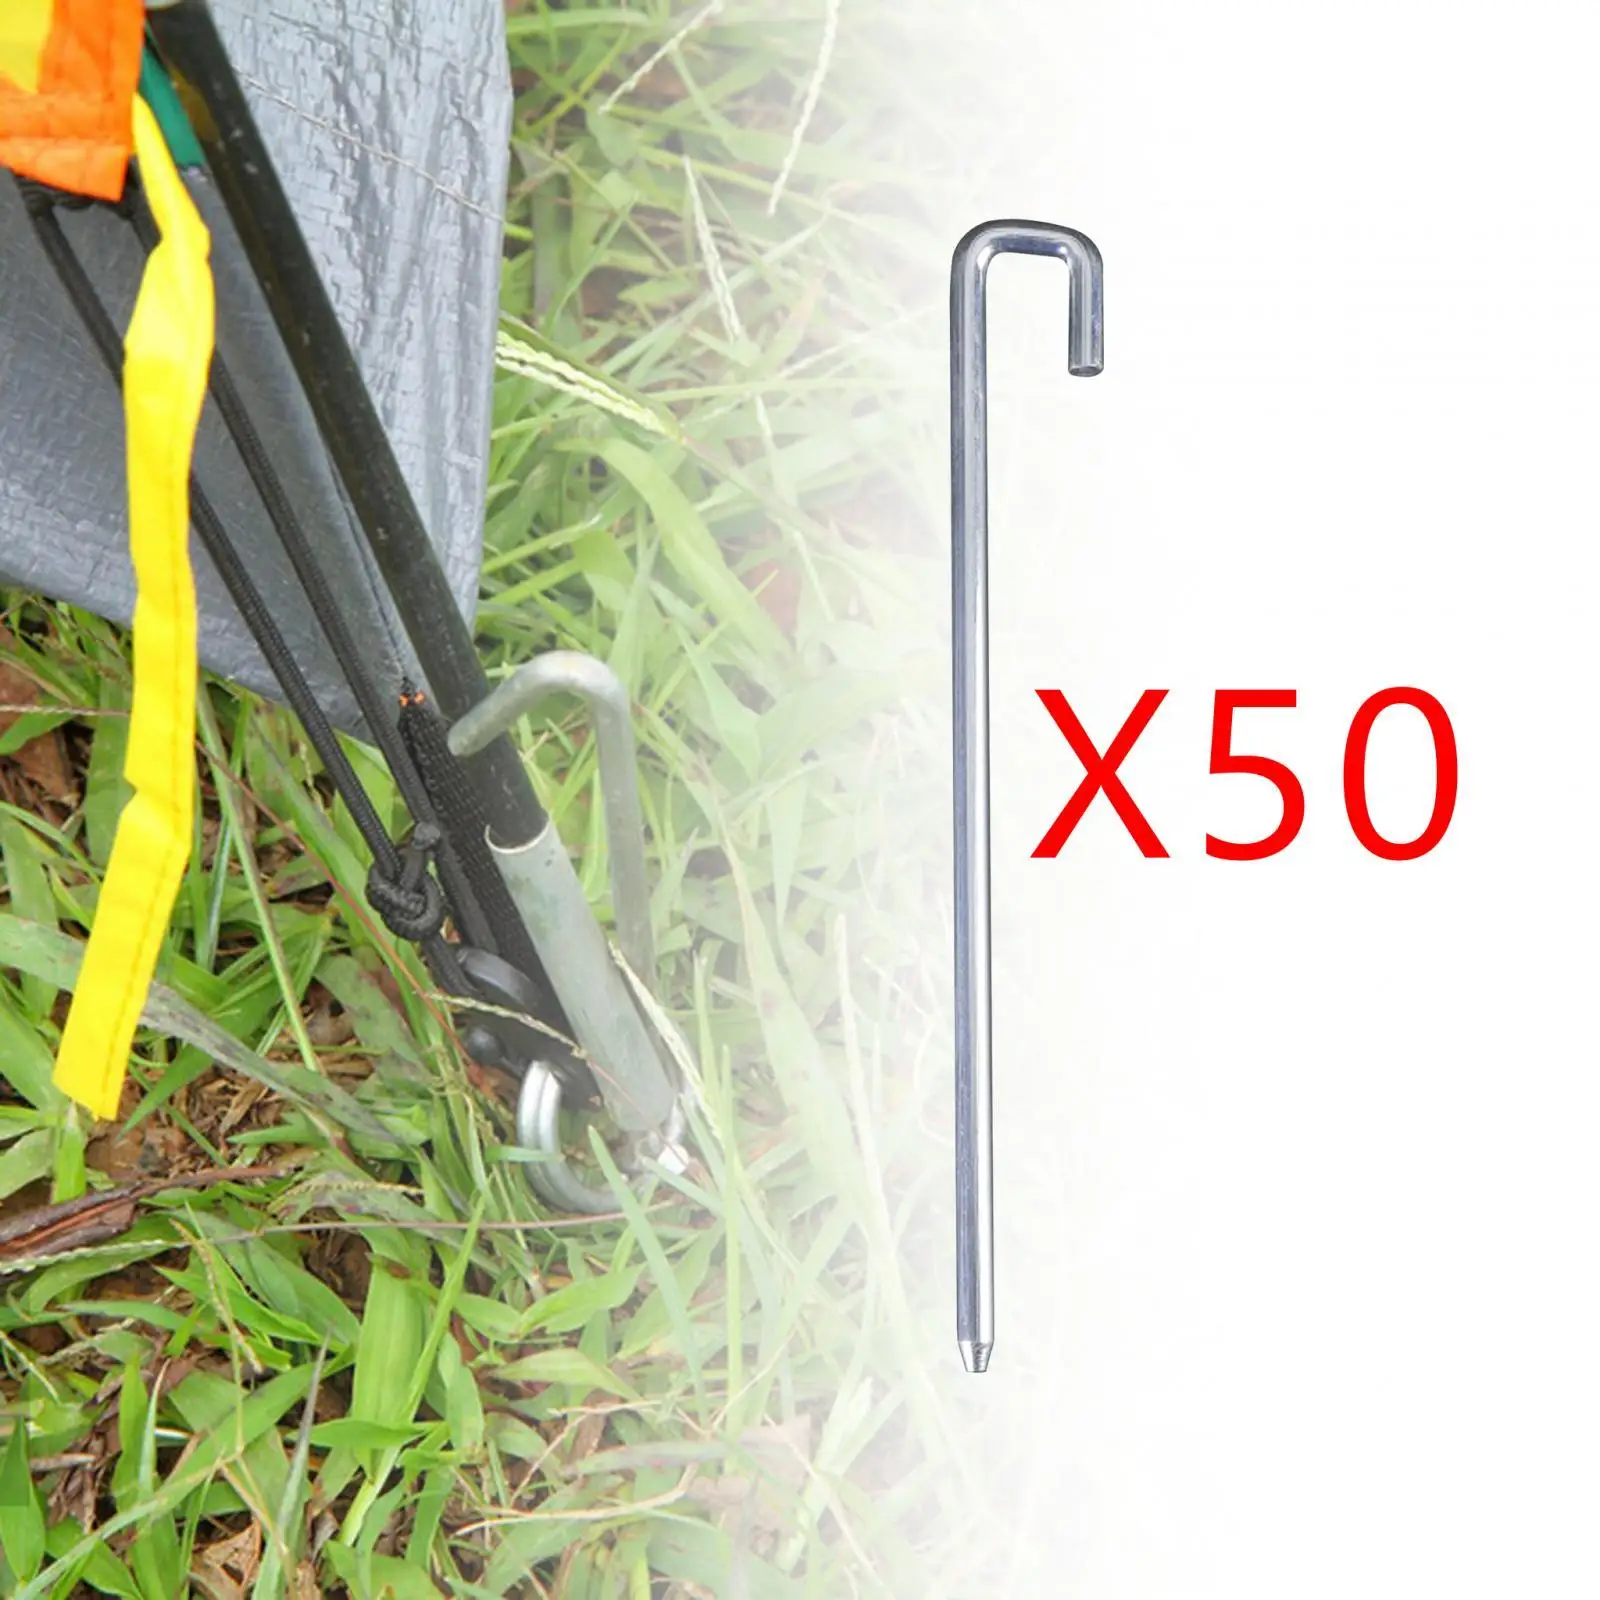 50 Pieces Tent Pegs 250mm Tent Nails U Shape Hook Aluminum Rust Proof for Hard Floors Accessory Multipurpose Durable Yard Stakes